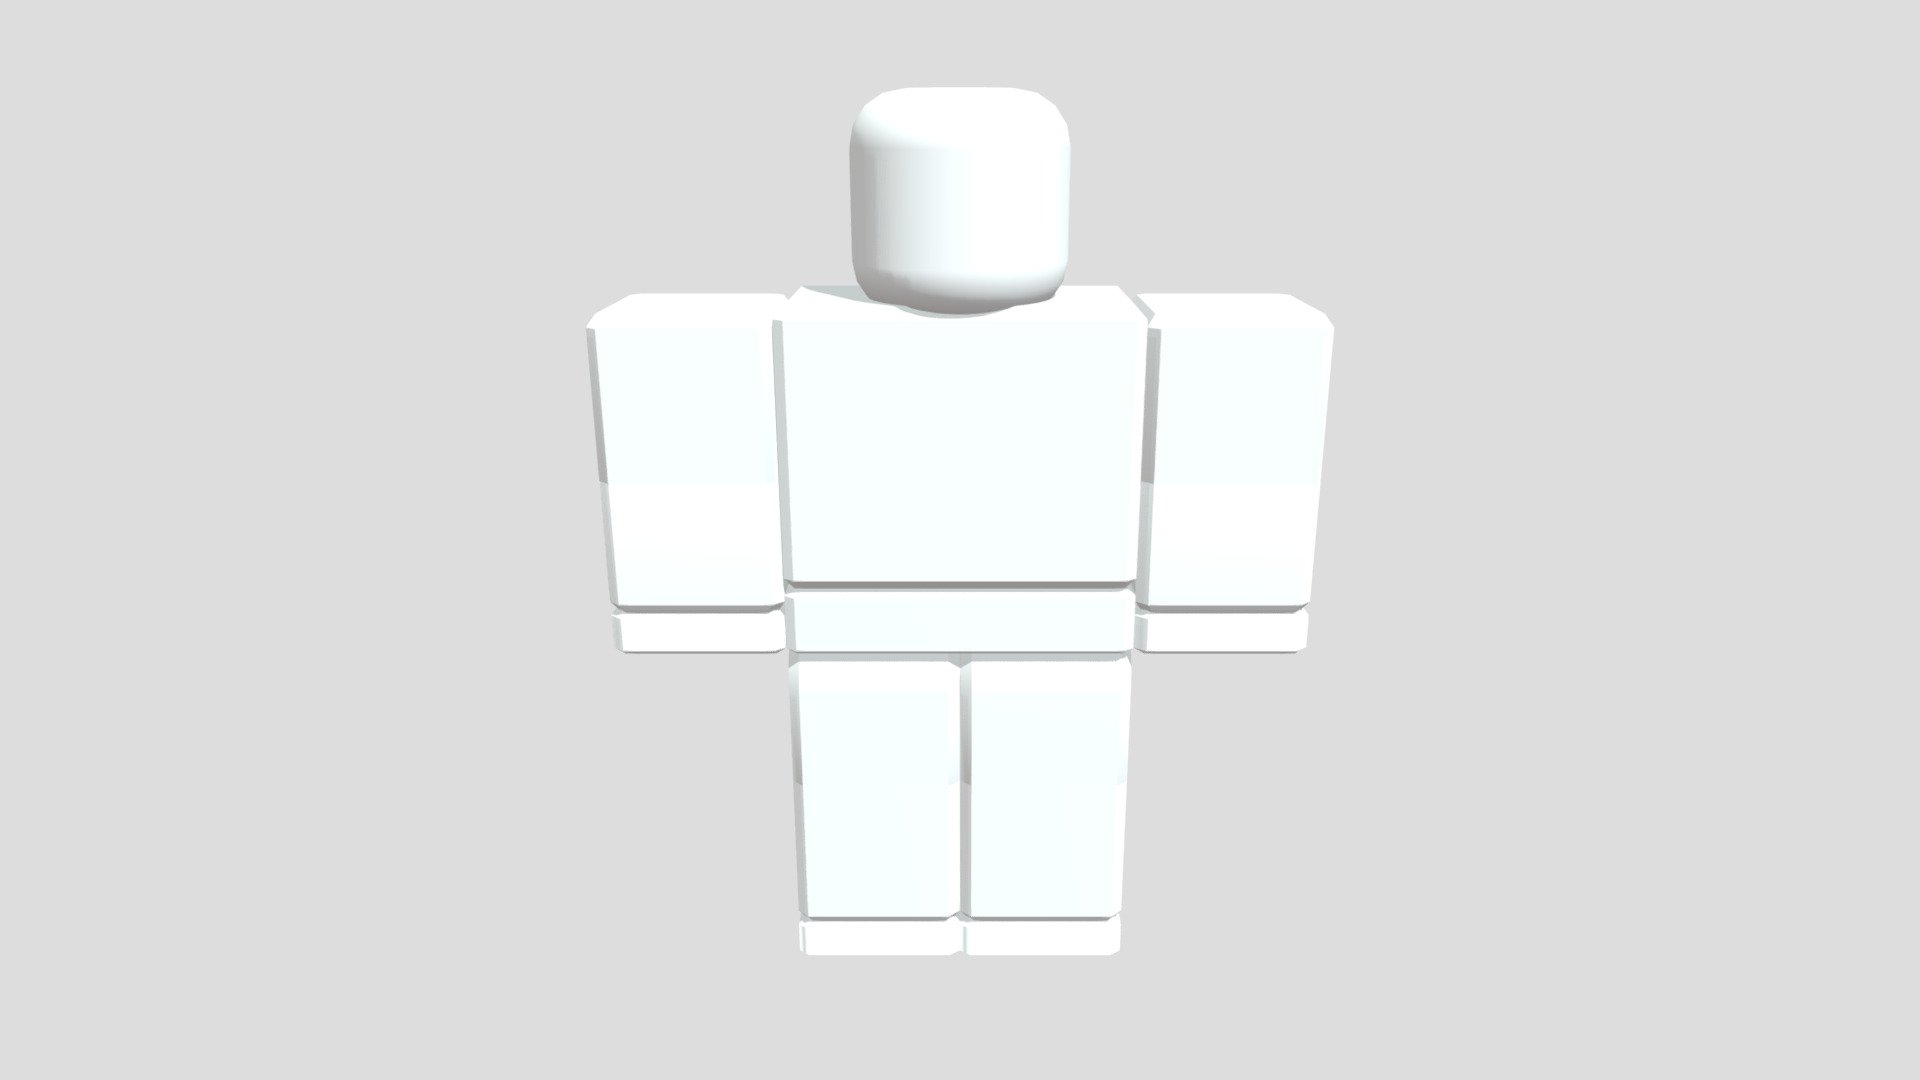 Download 23 Images Of Template For Roblox On Ipad - Black Shirt